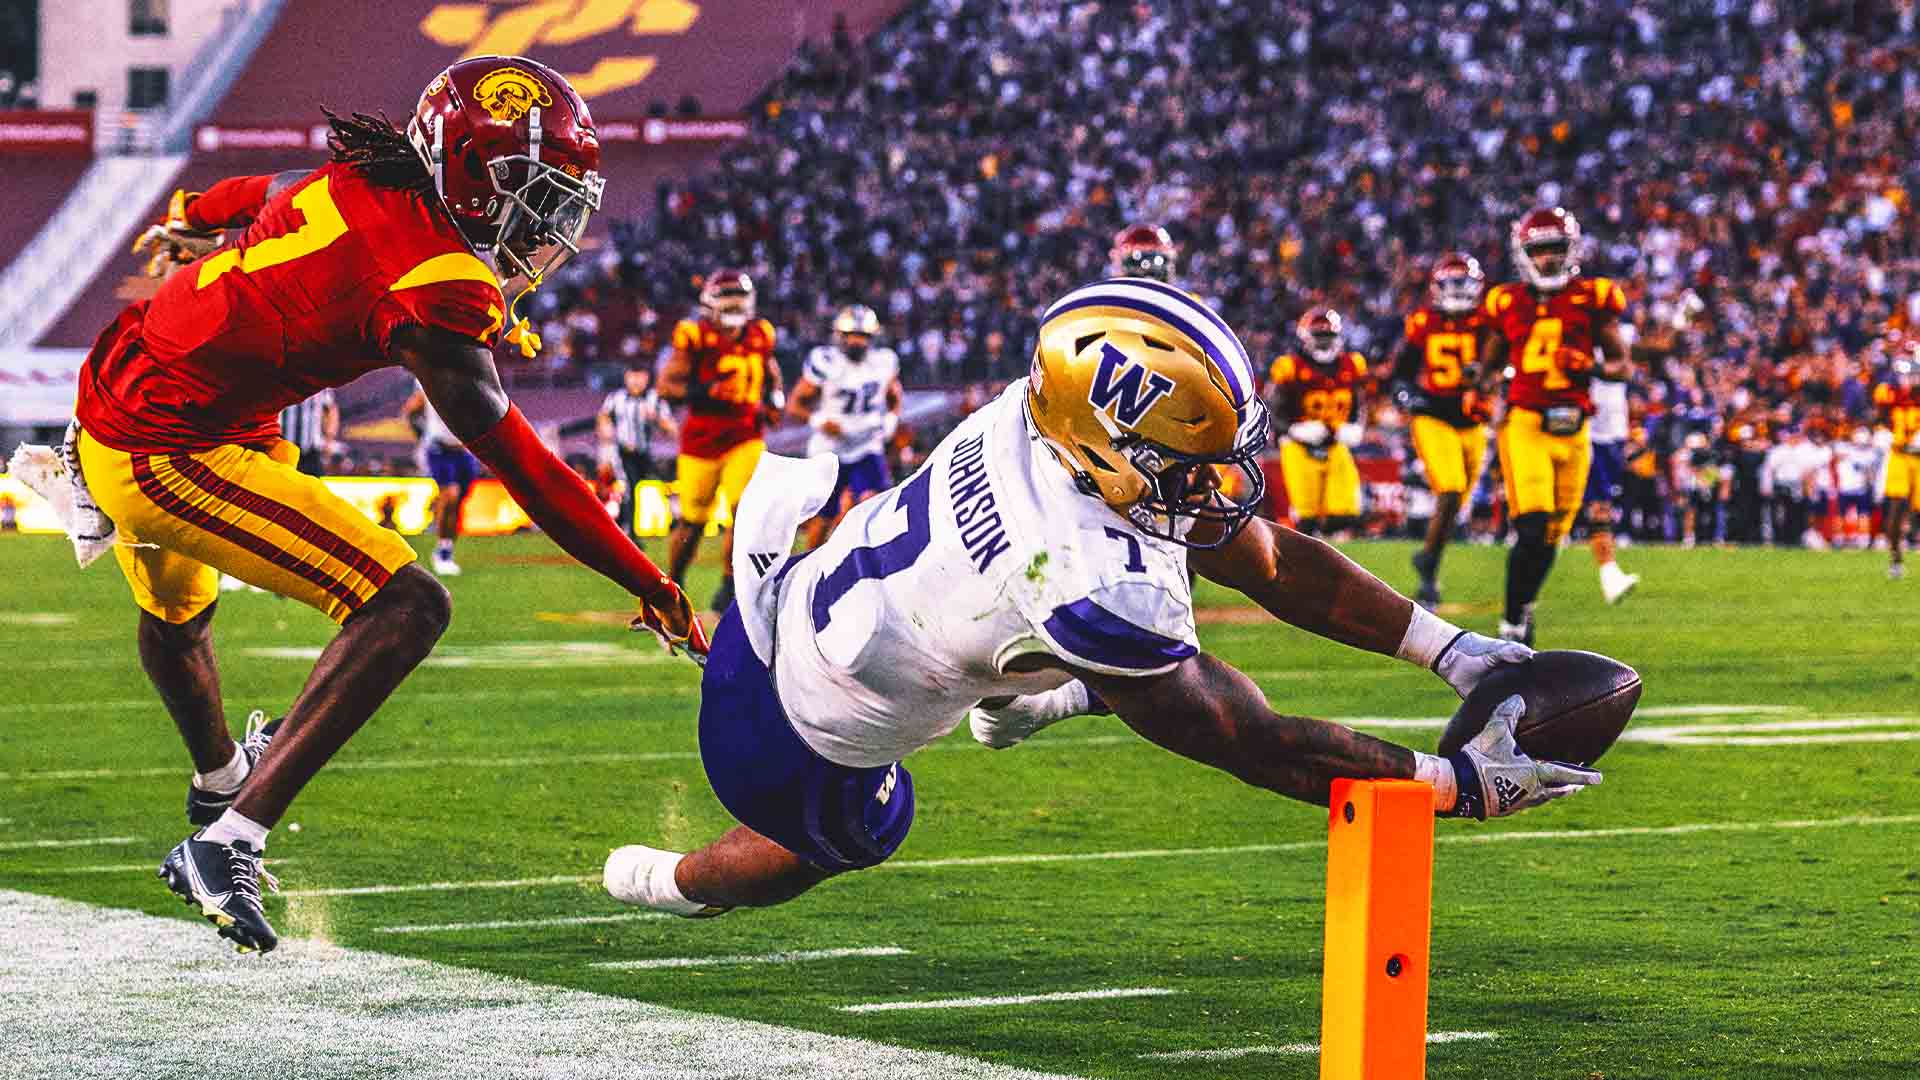 Washington outlasts USC, 52-42, as Dillon Johnson rushes for 256 yards